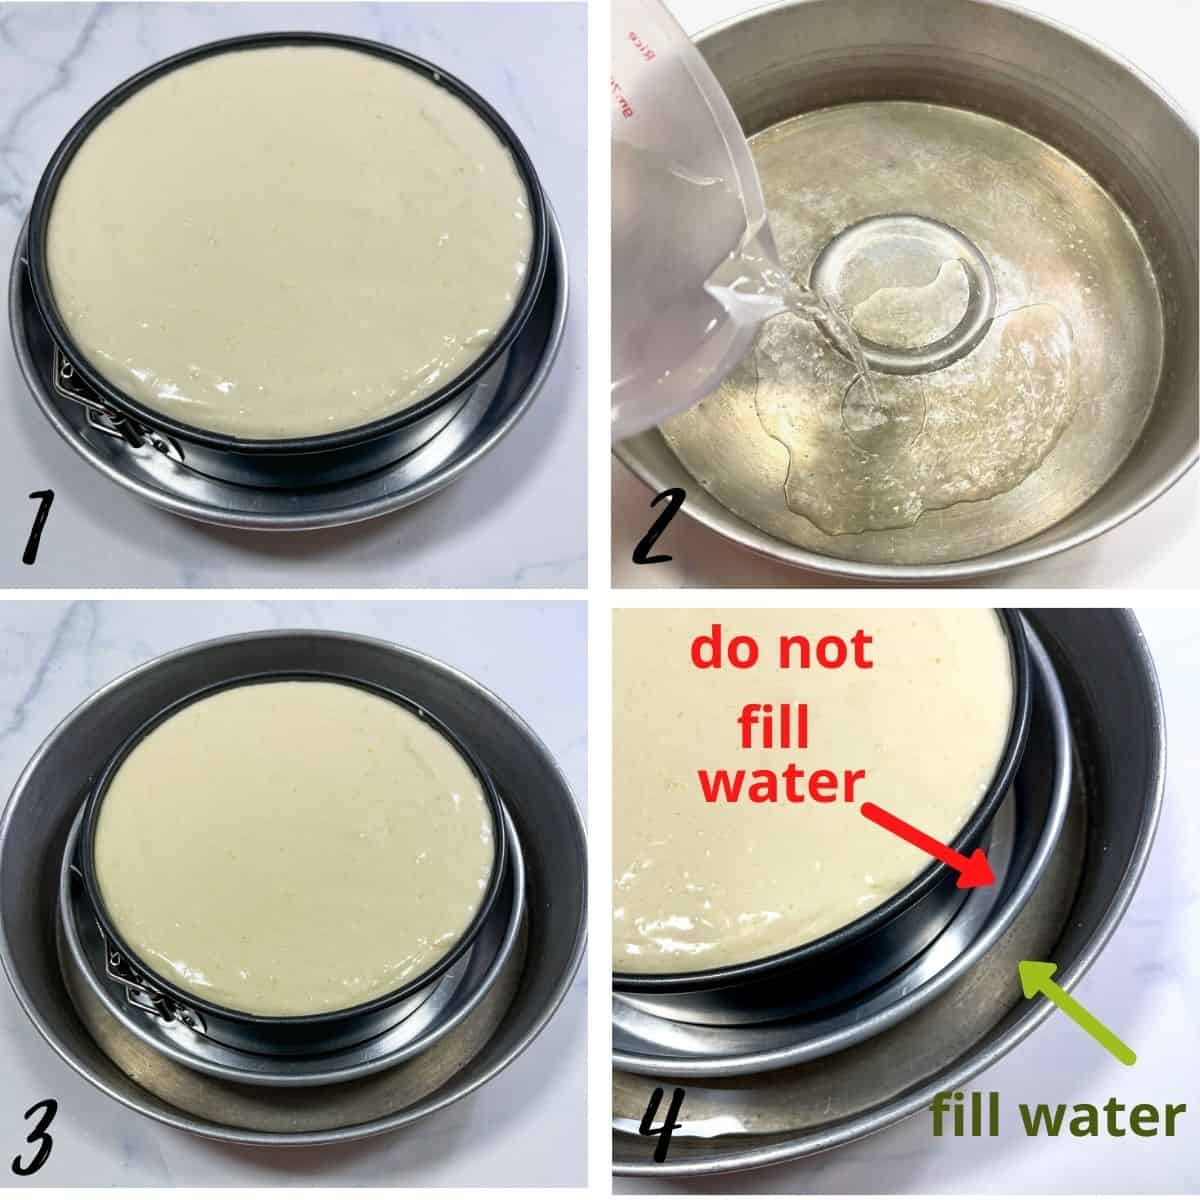 A poster of 4 images showing how to make a cake in a water bath.